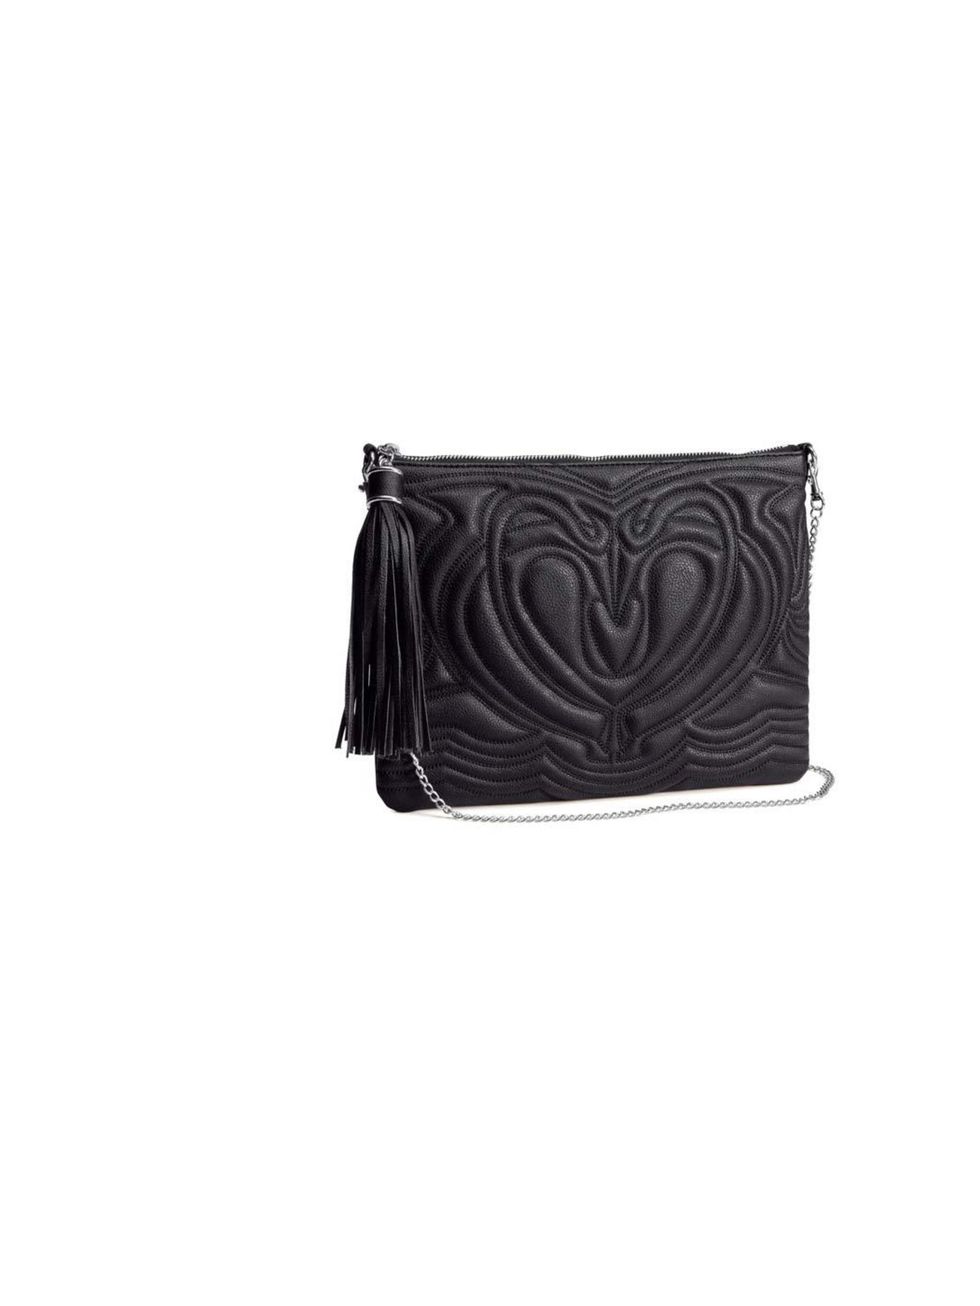 <p>This little beauty is on Market and Retail Editor Harriet Stewart's shopping list. The quilted design and tassel make for a quirky twist on the classic black bag.</p><p><a href="http://www.hm.com/gb/product/13303?article=13303-A">H&M</a> bag, £14.99</p